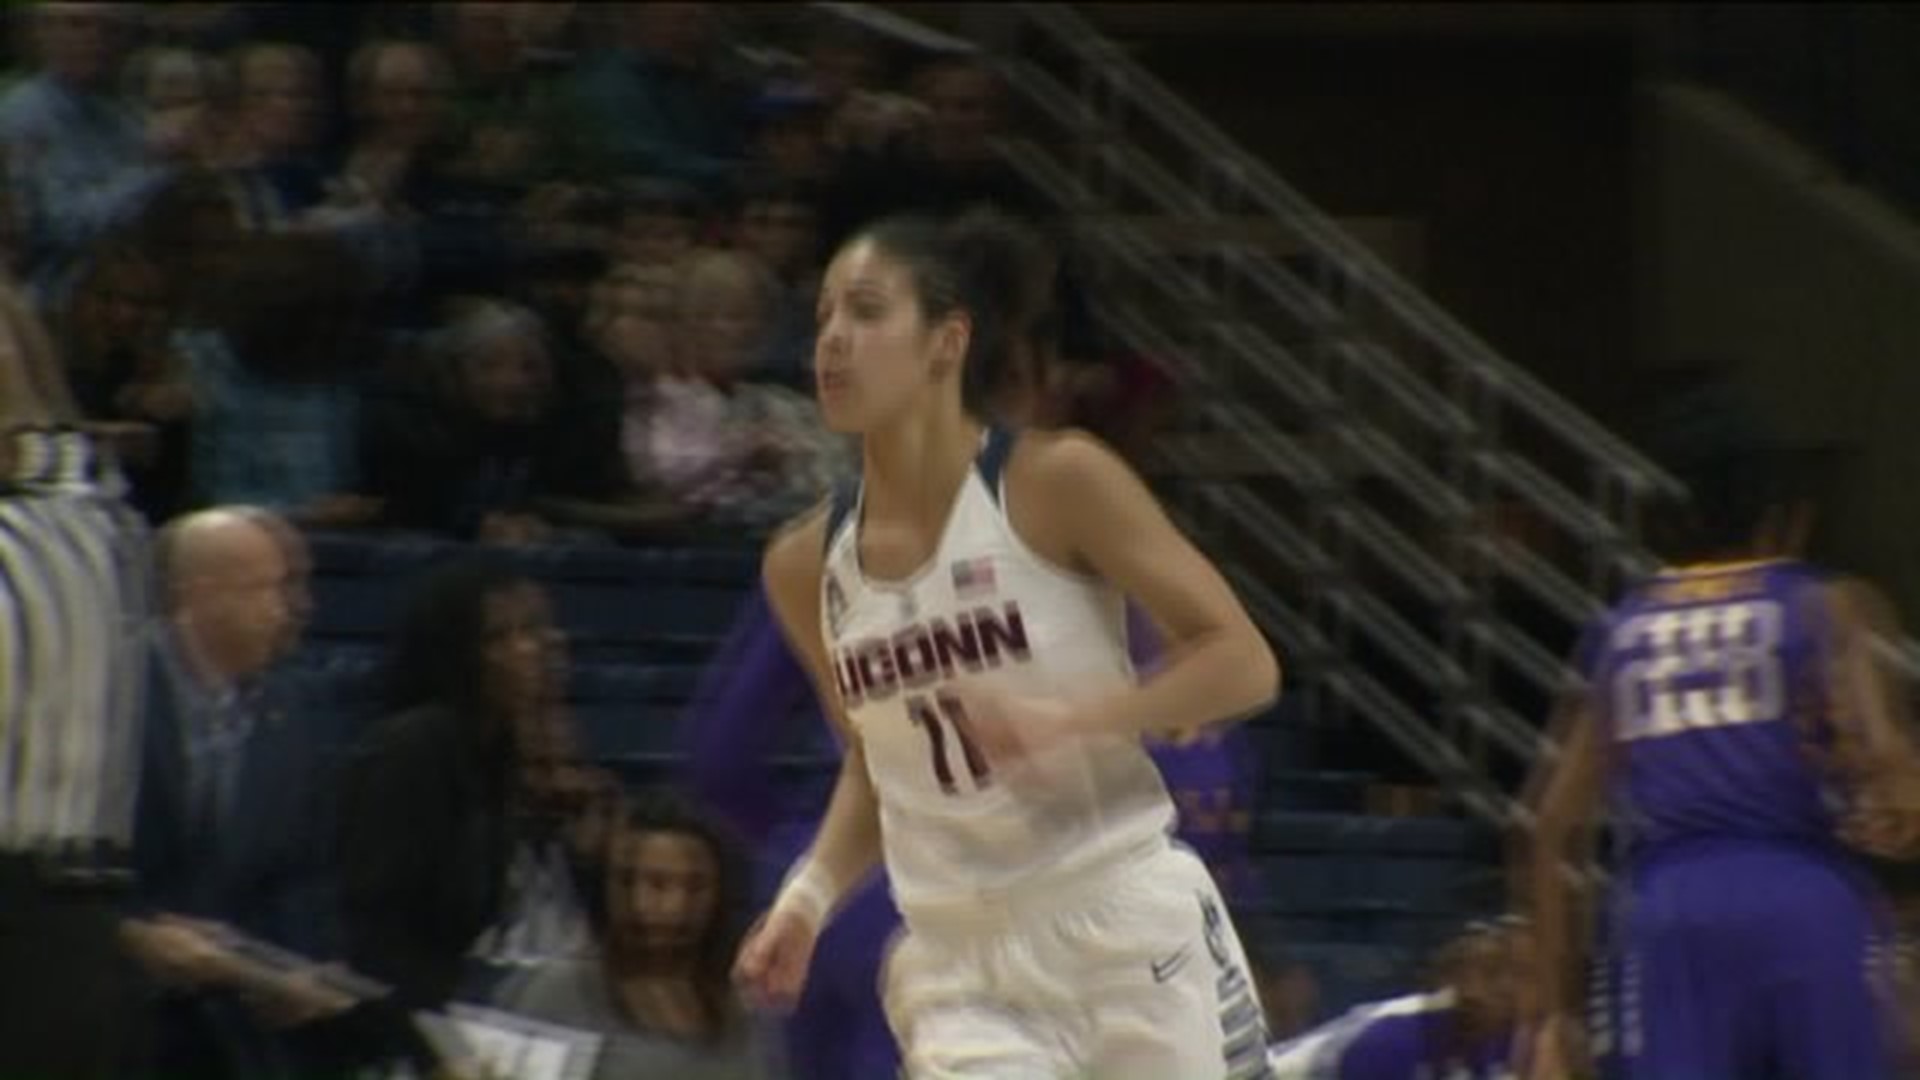 UConn women win in another rout